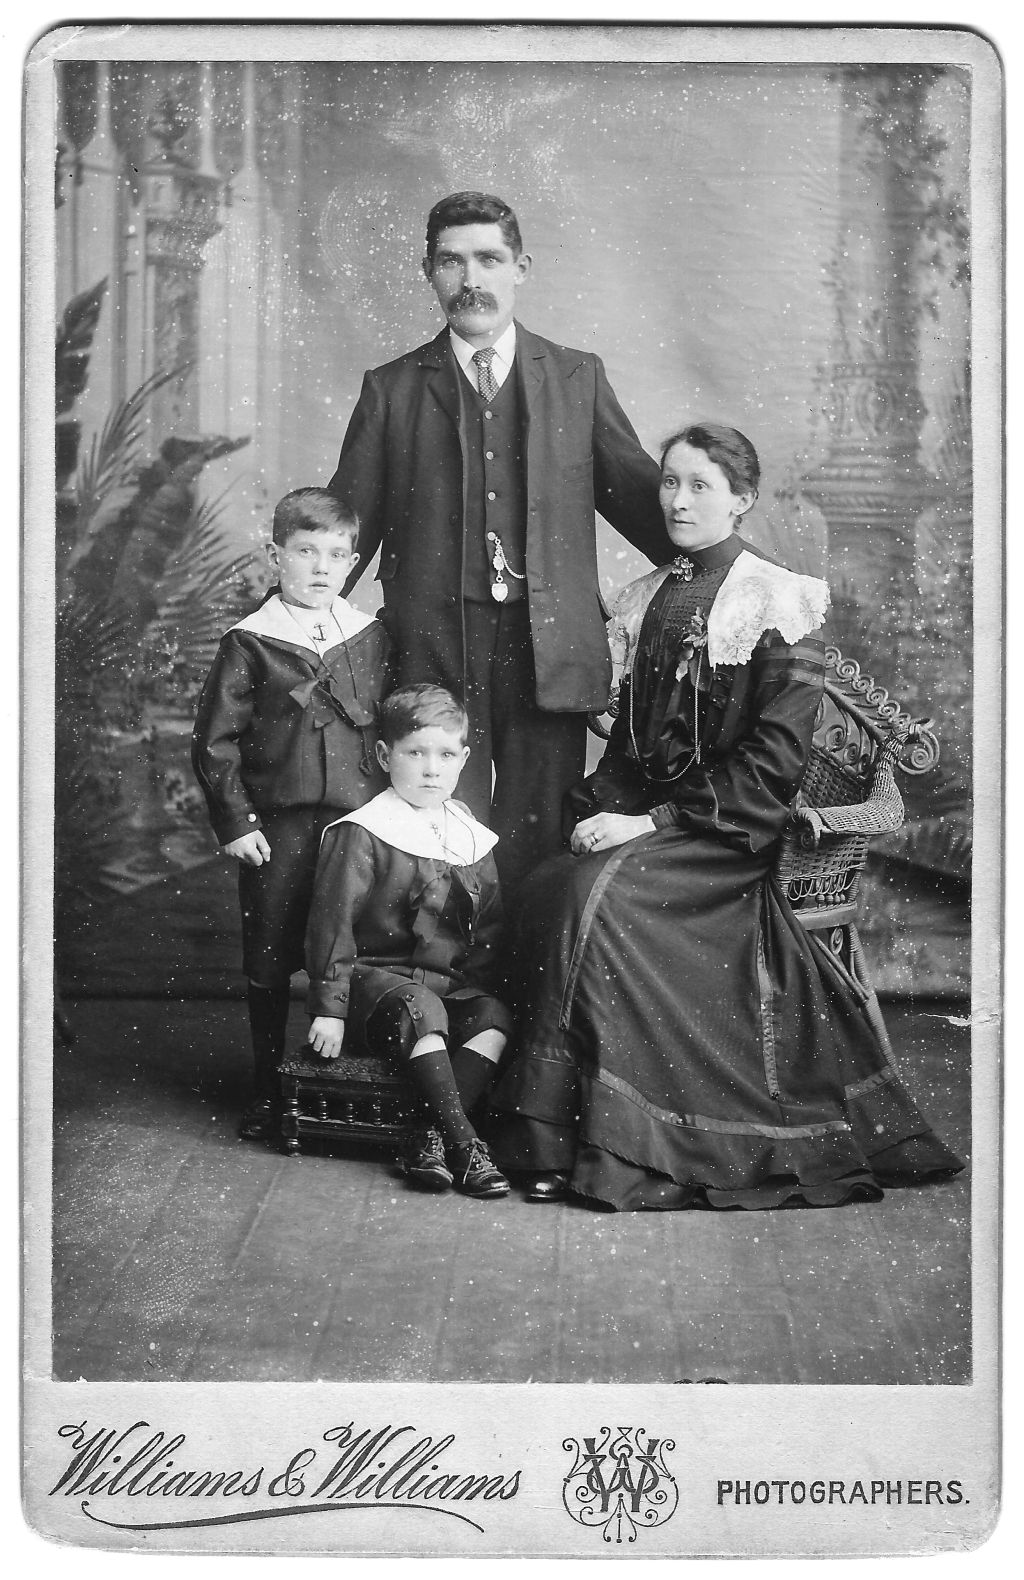 Studio portrait of the Edmunds family in about 1905. The father stands behind his wife and two children.